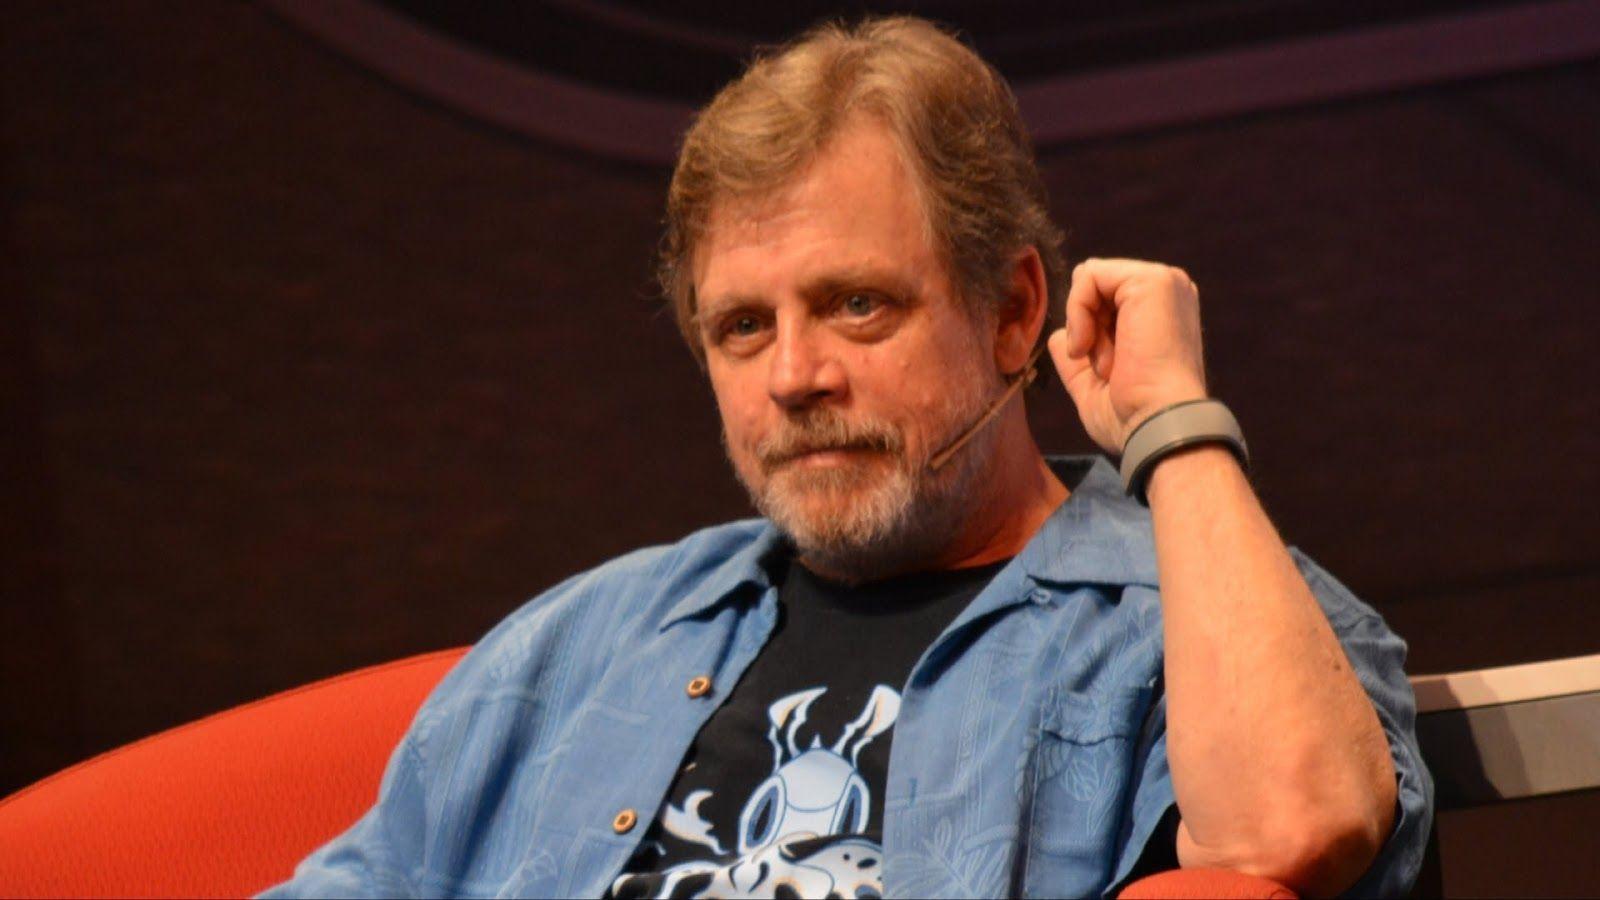 Mark Hamill All Upcoming Movies List 2017 With Release Dates